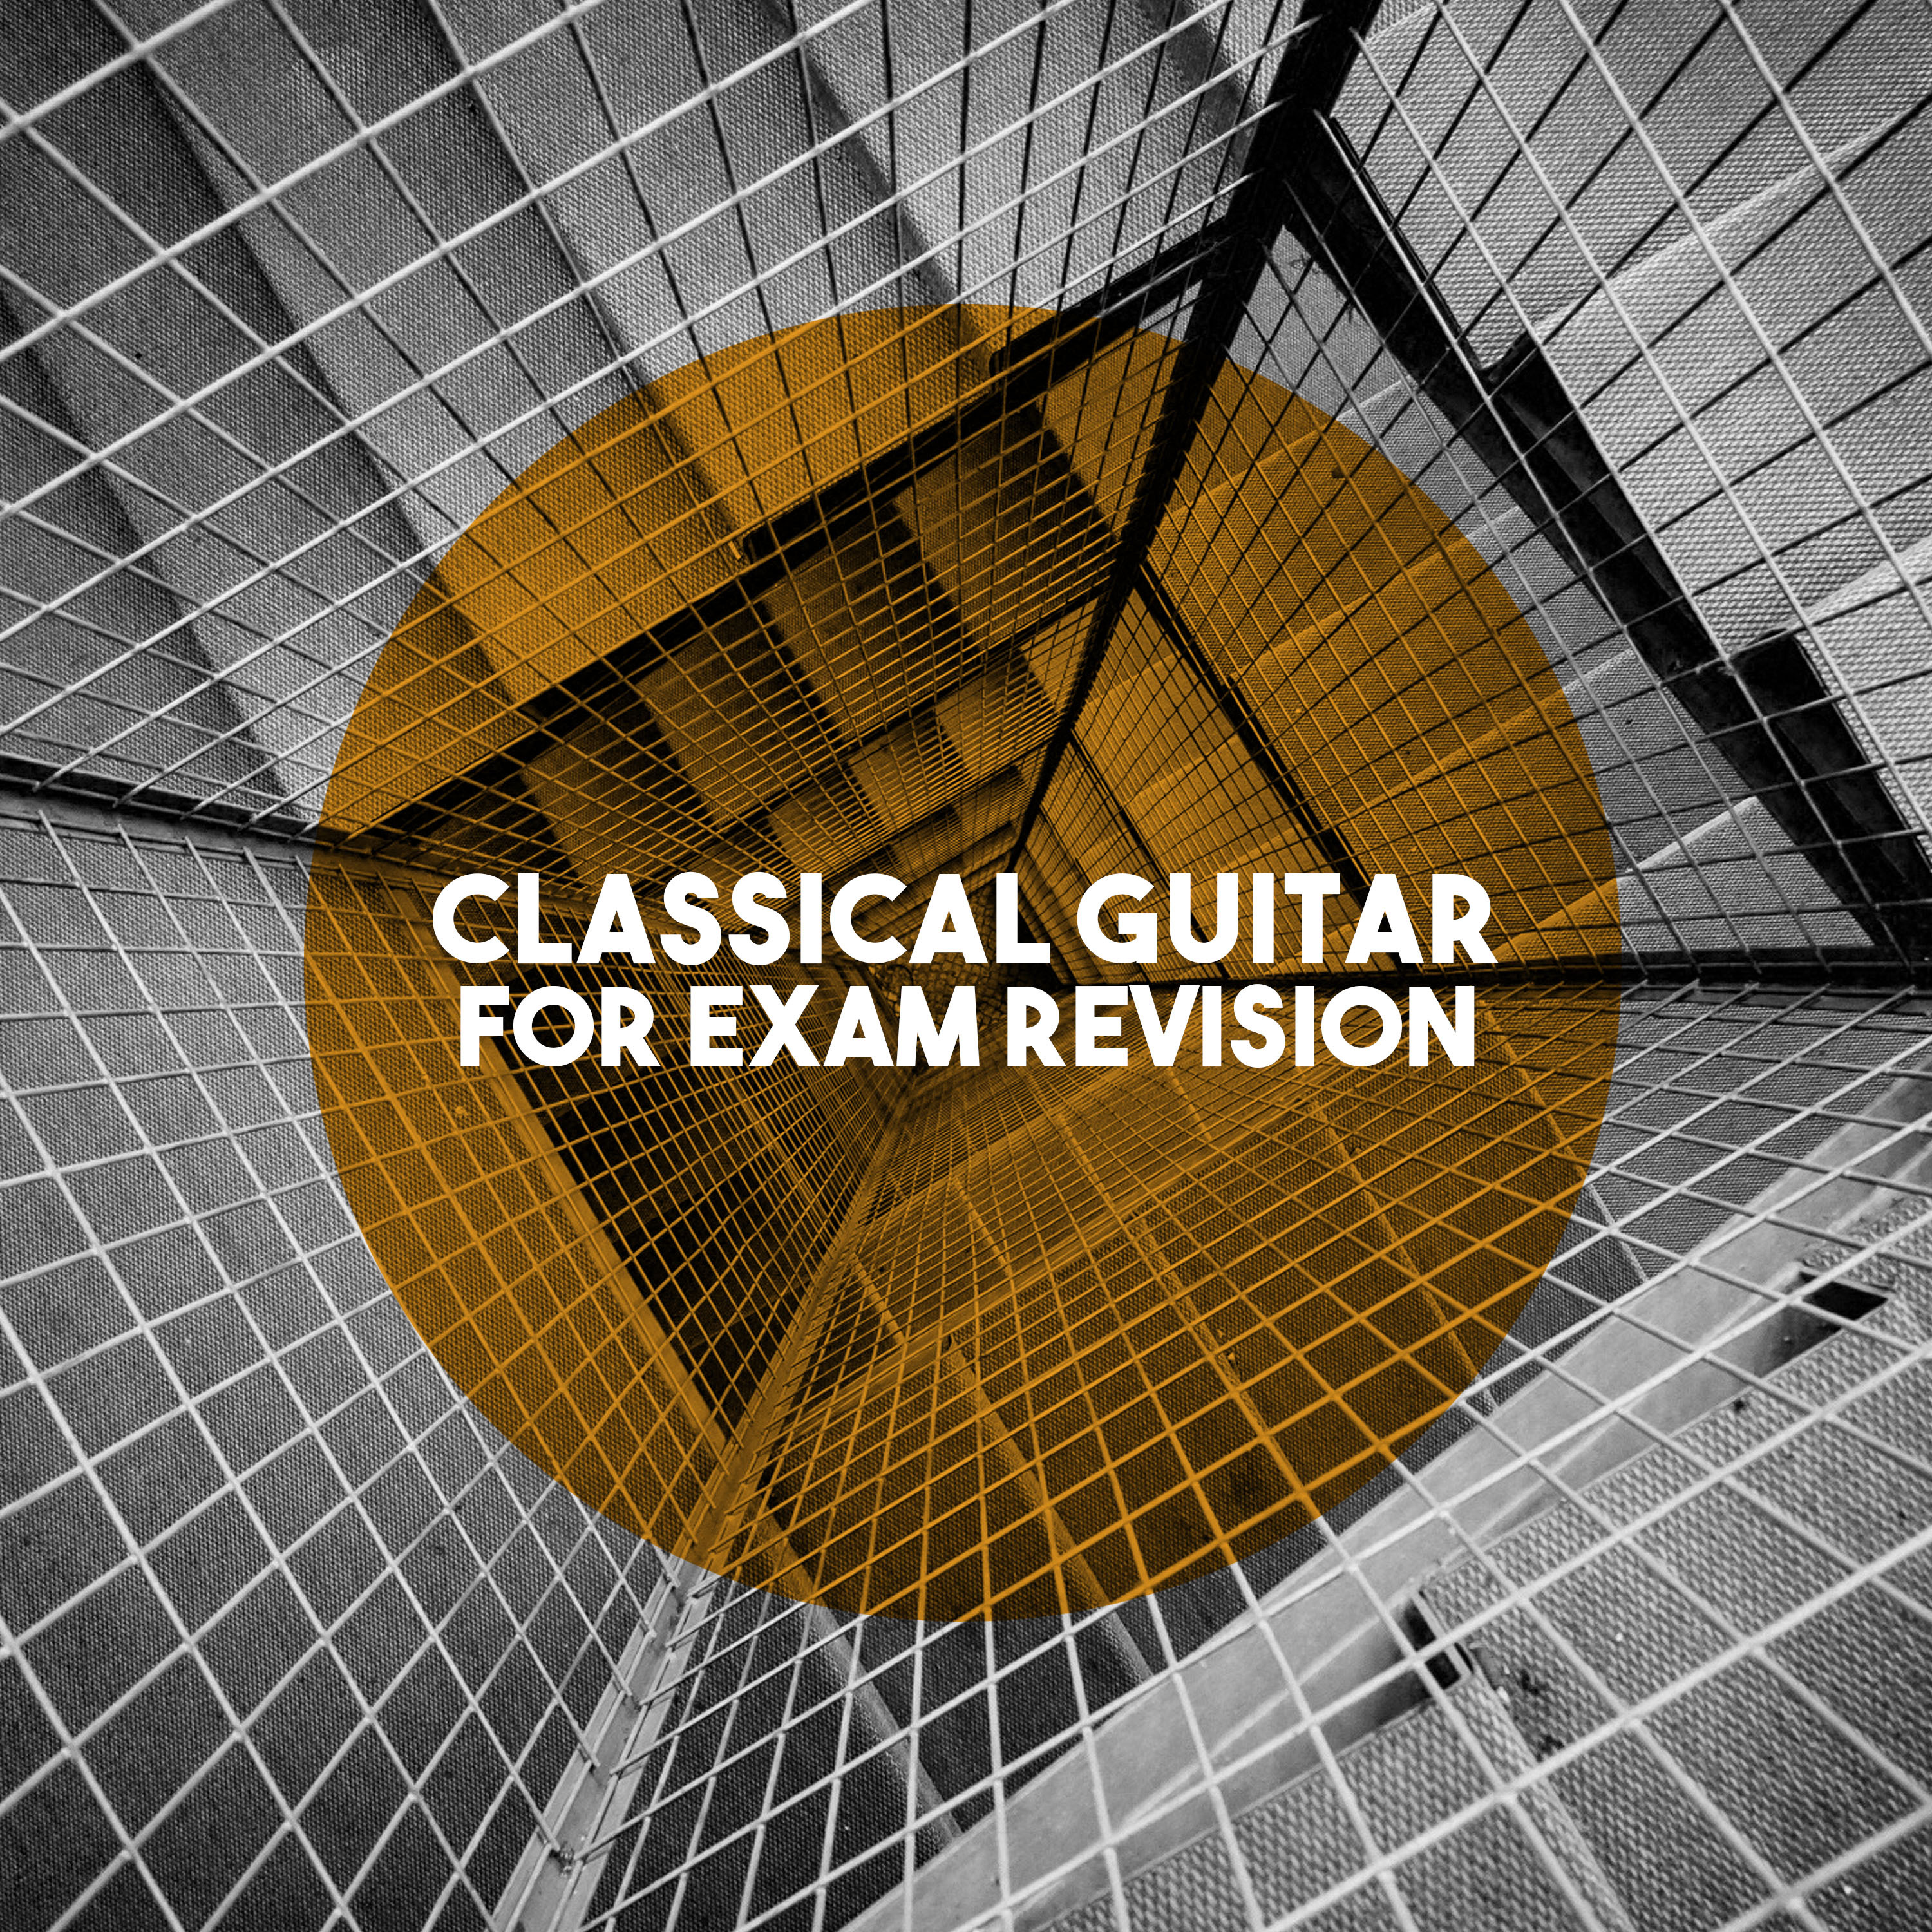 Concerto for Guitar and Strings in A Major, Op. 8: Allegro